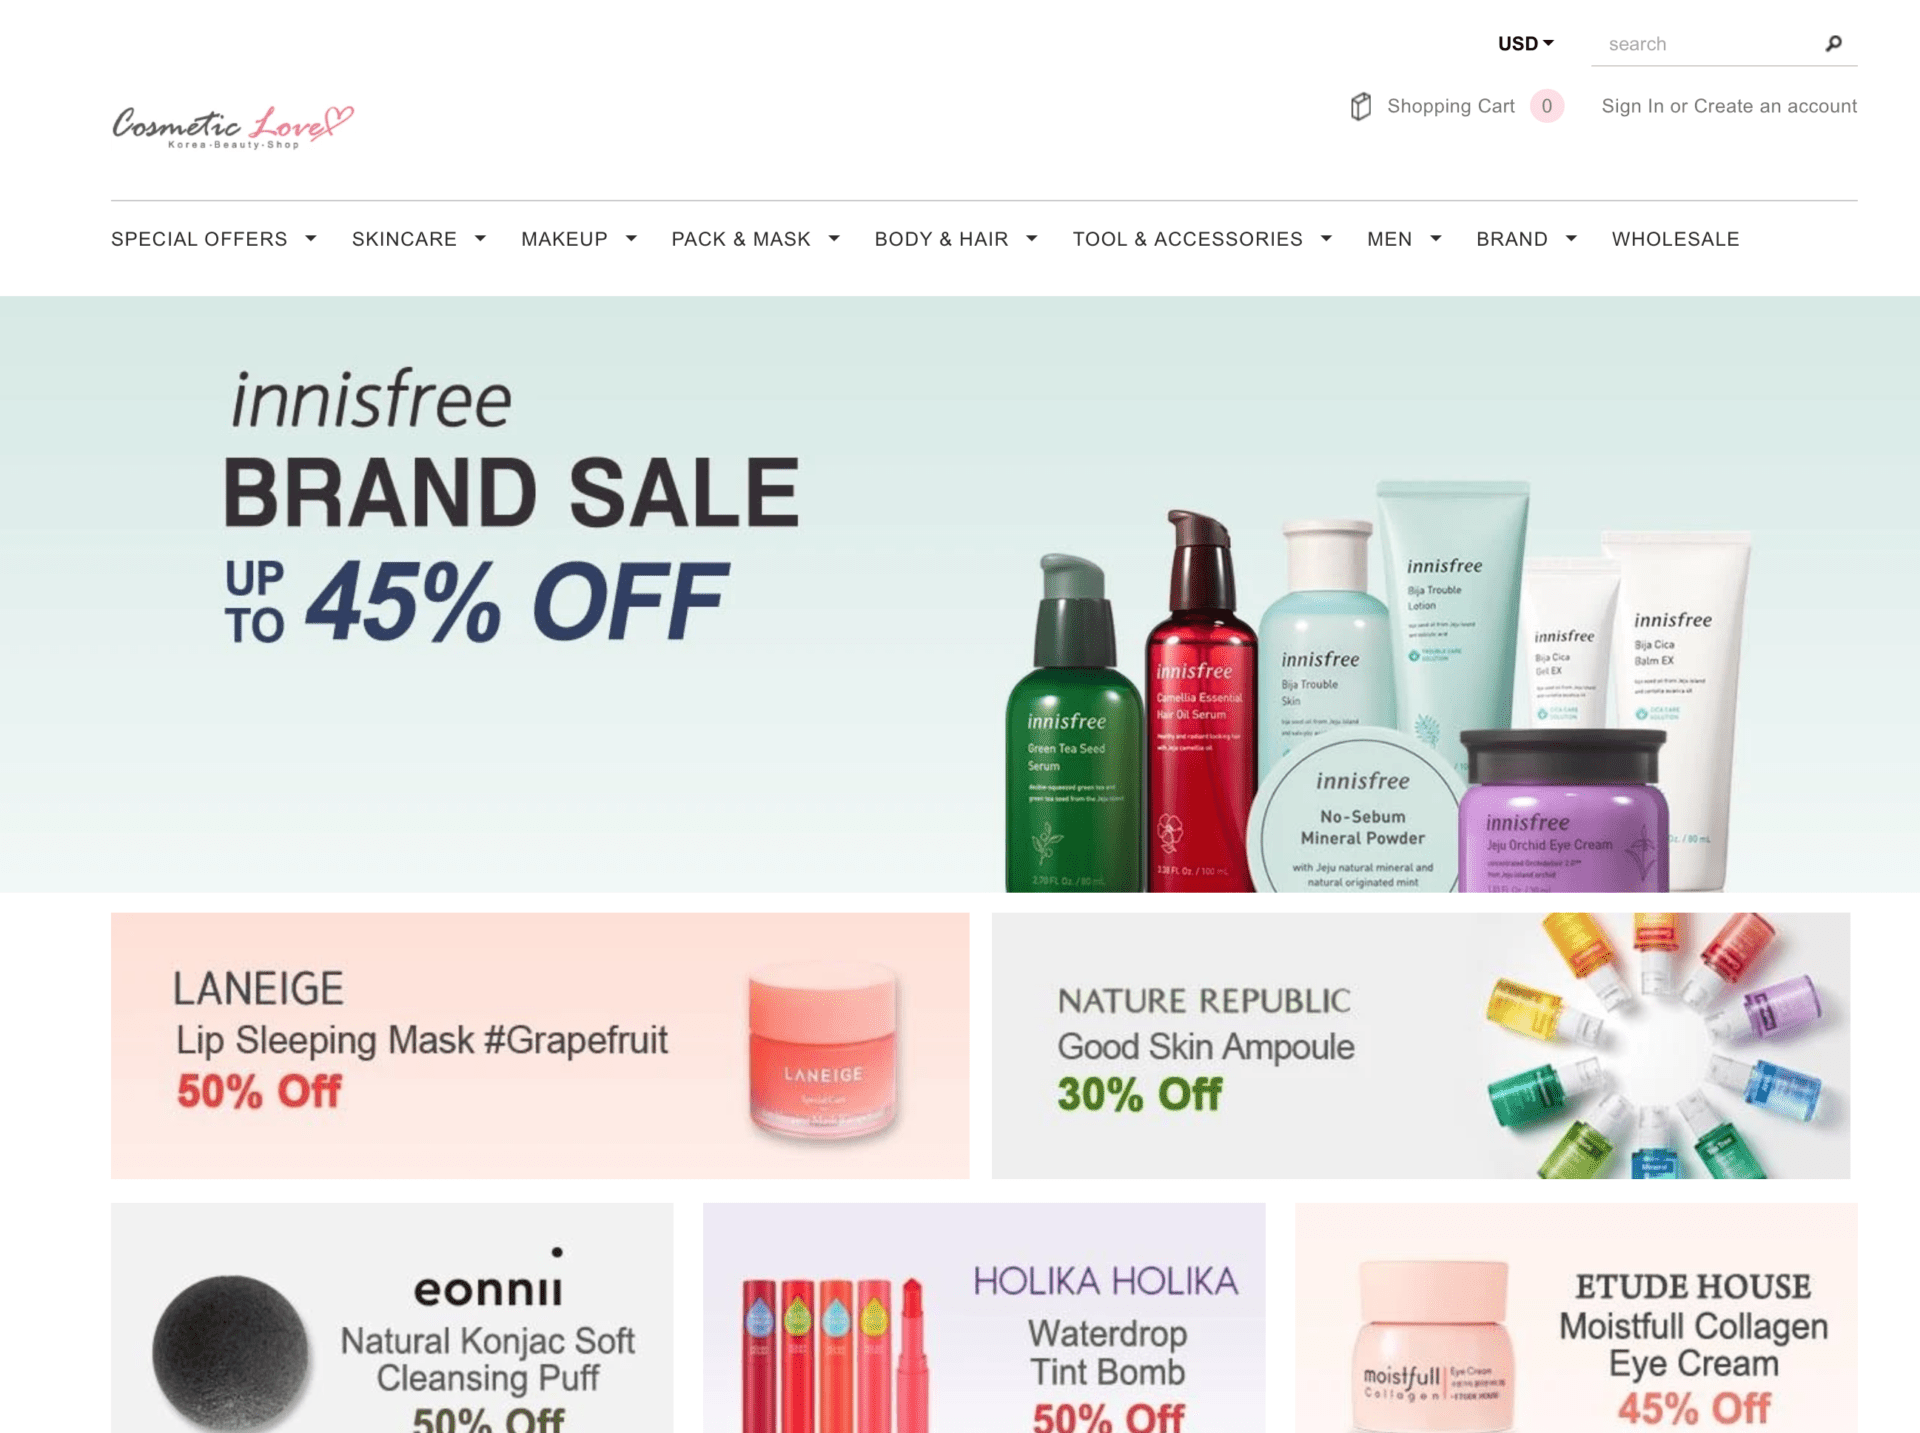 Shop for Korean Makeup, Beauty and Skin Care Online